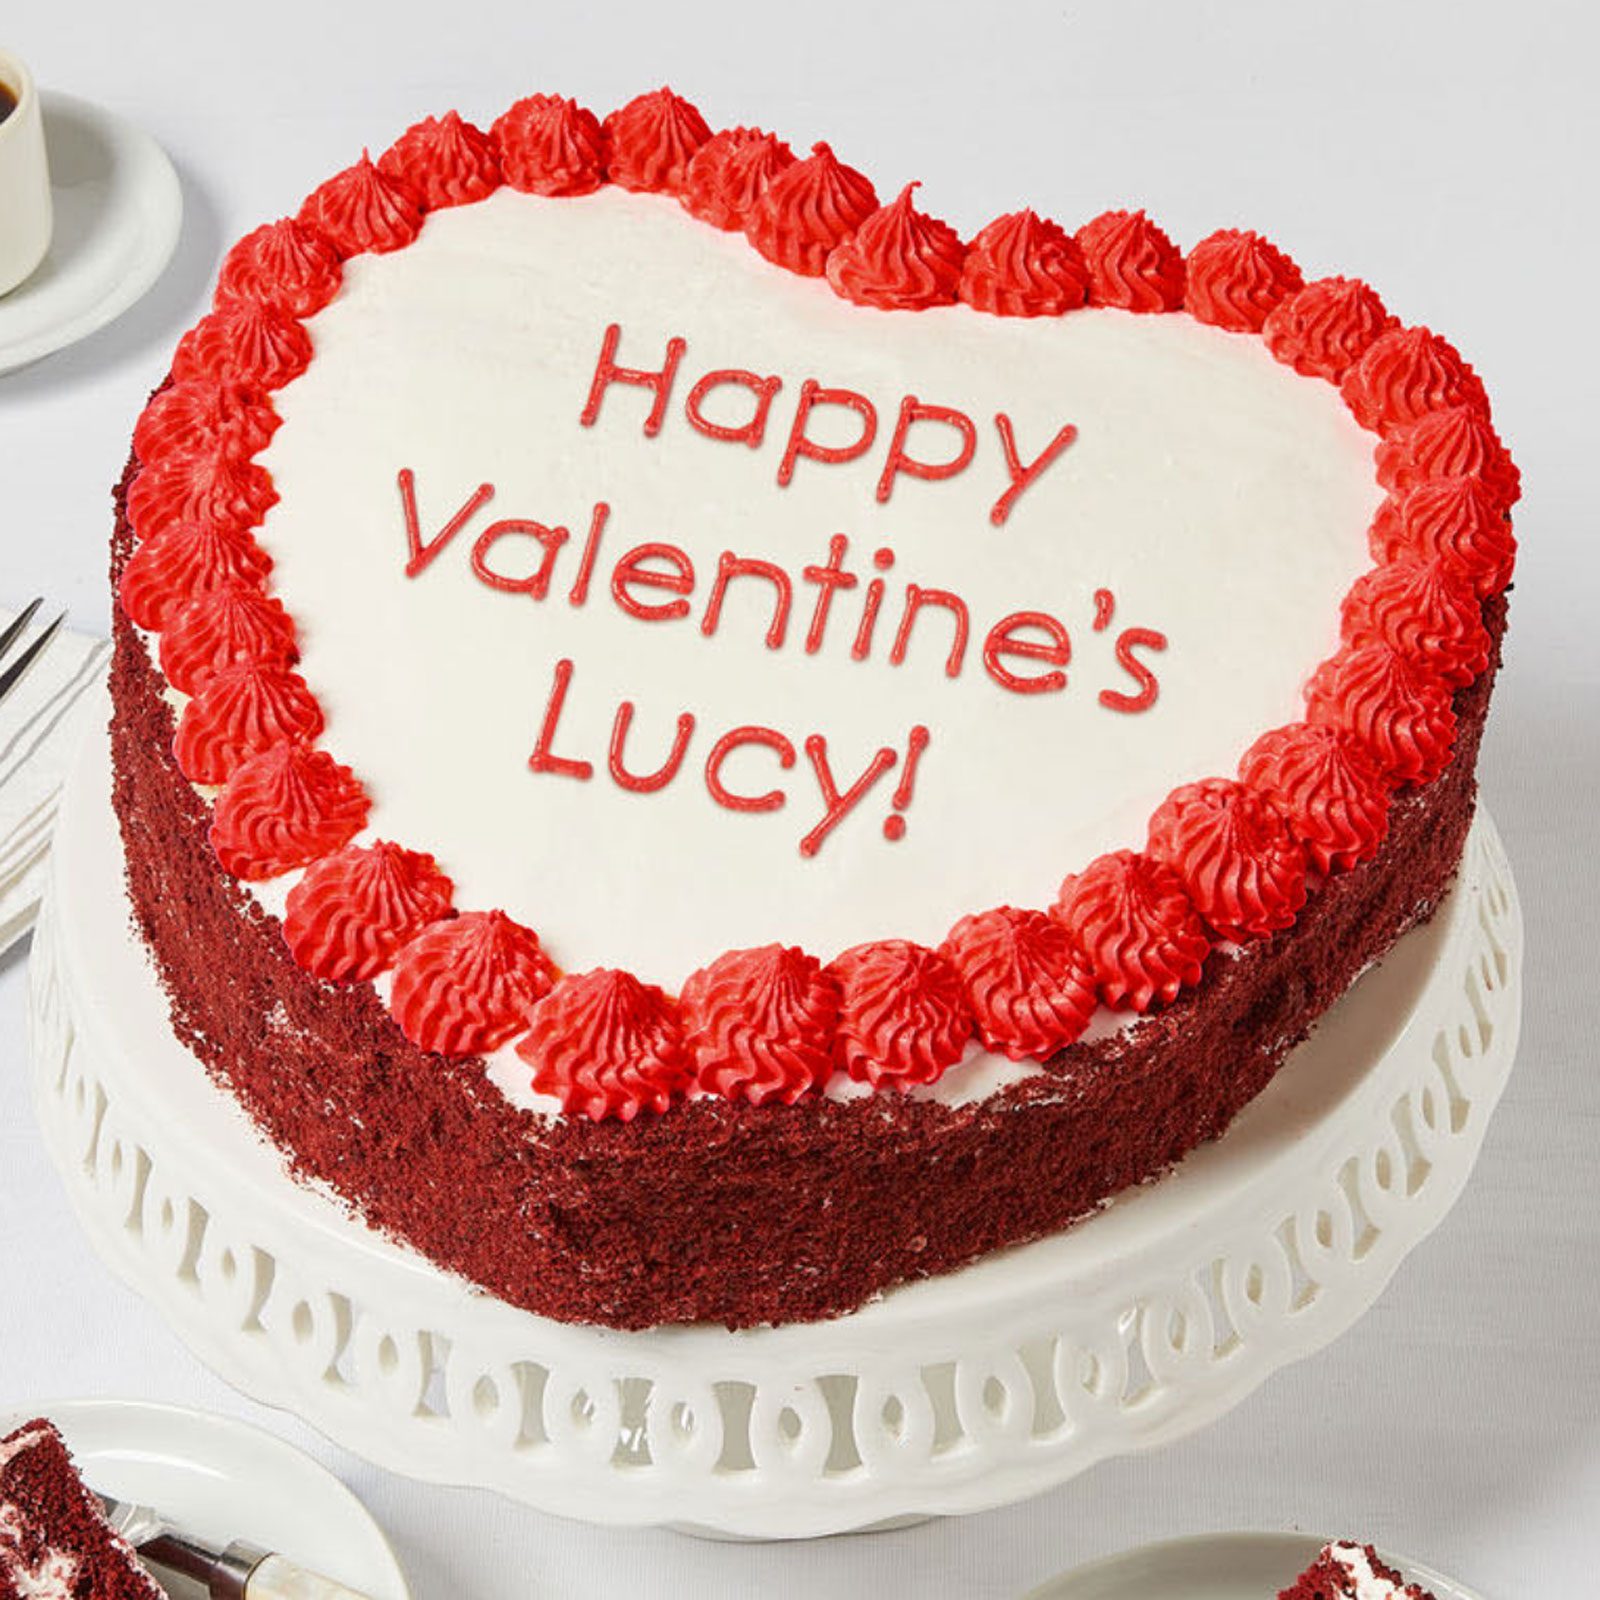 For the far-off loved one: Bake Me A Wish! Personalized 10-inch Heart-Shaped Red Velvet Cake